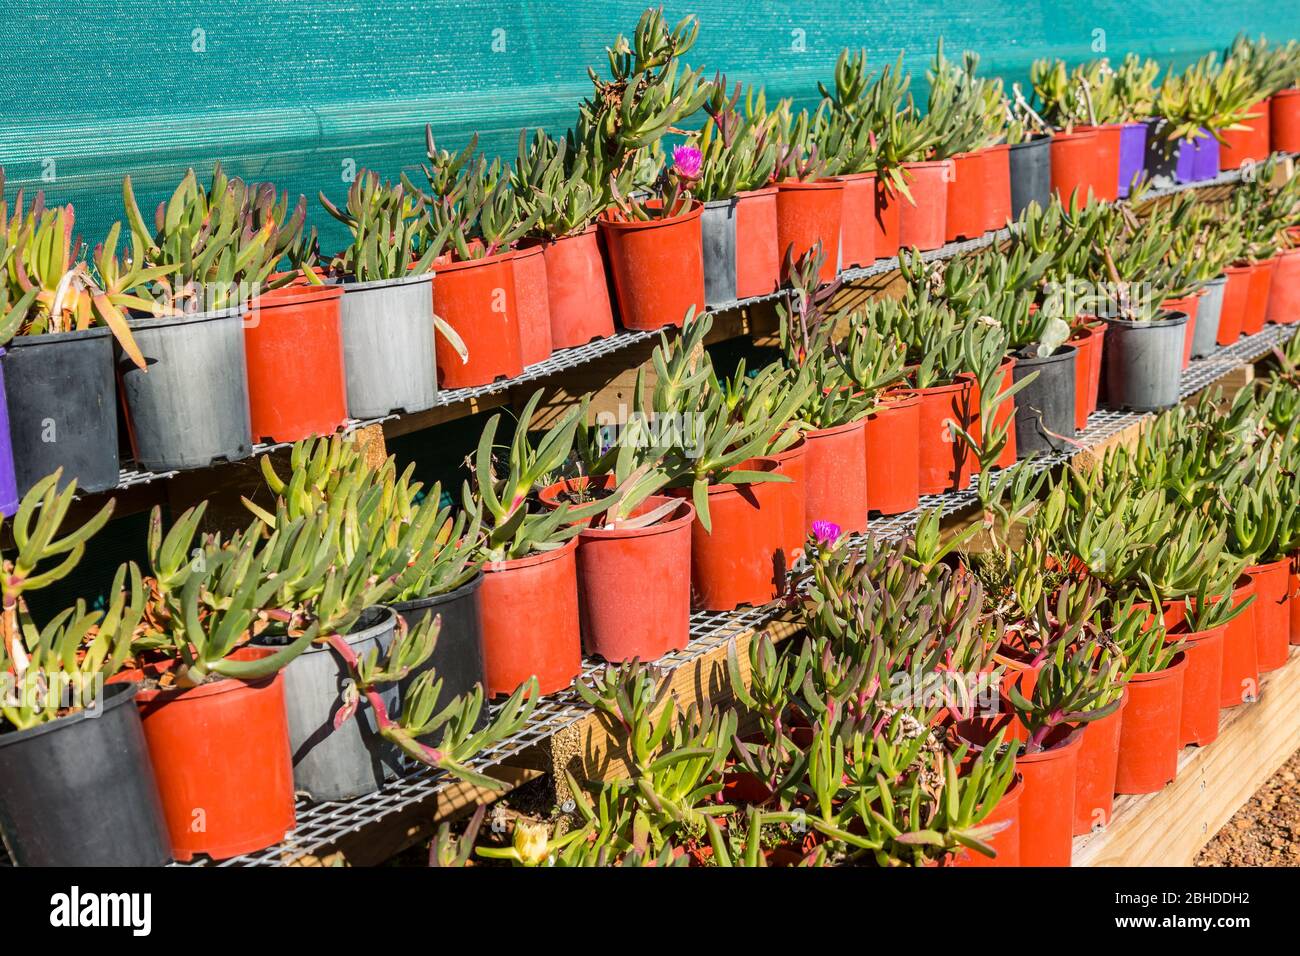 Pigface small plants growing in plastic pots in nursery Stock Photo